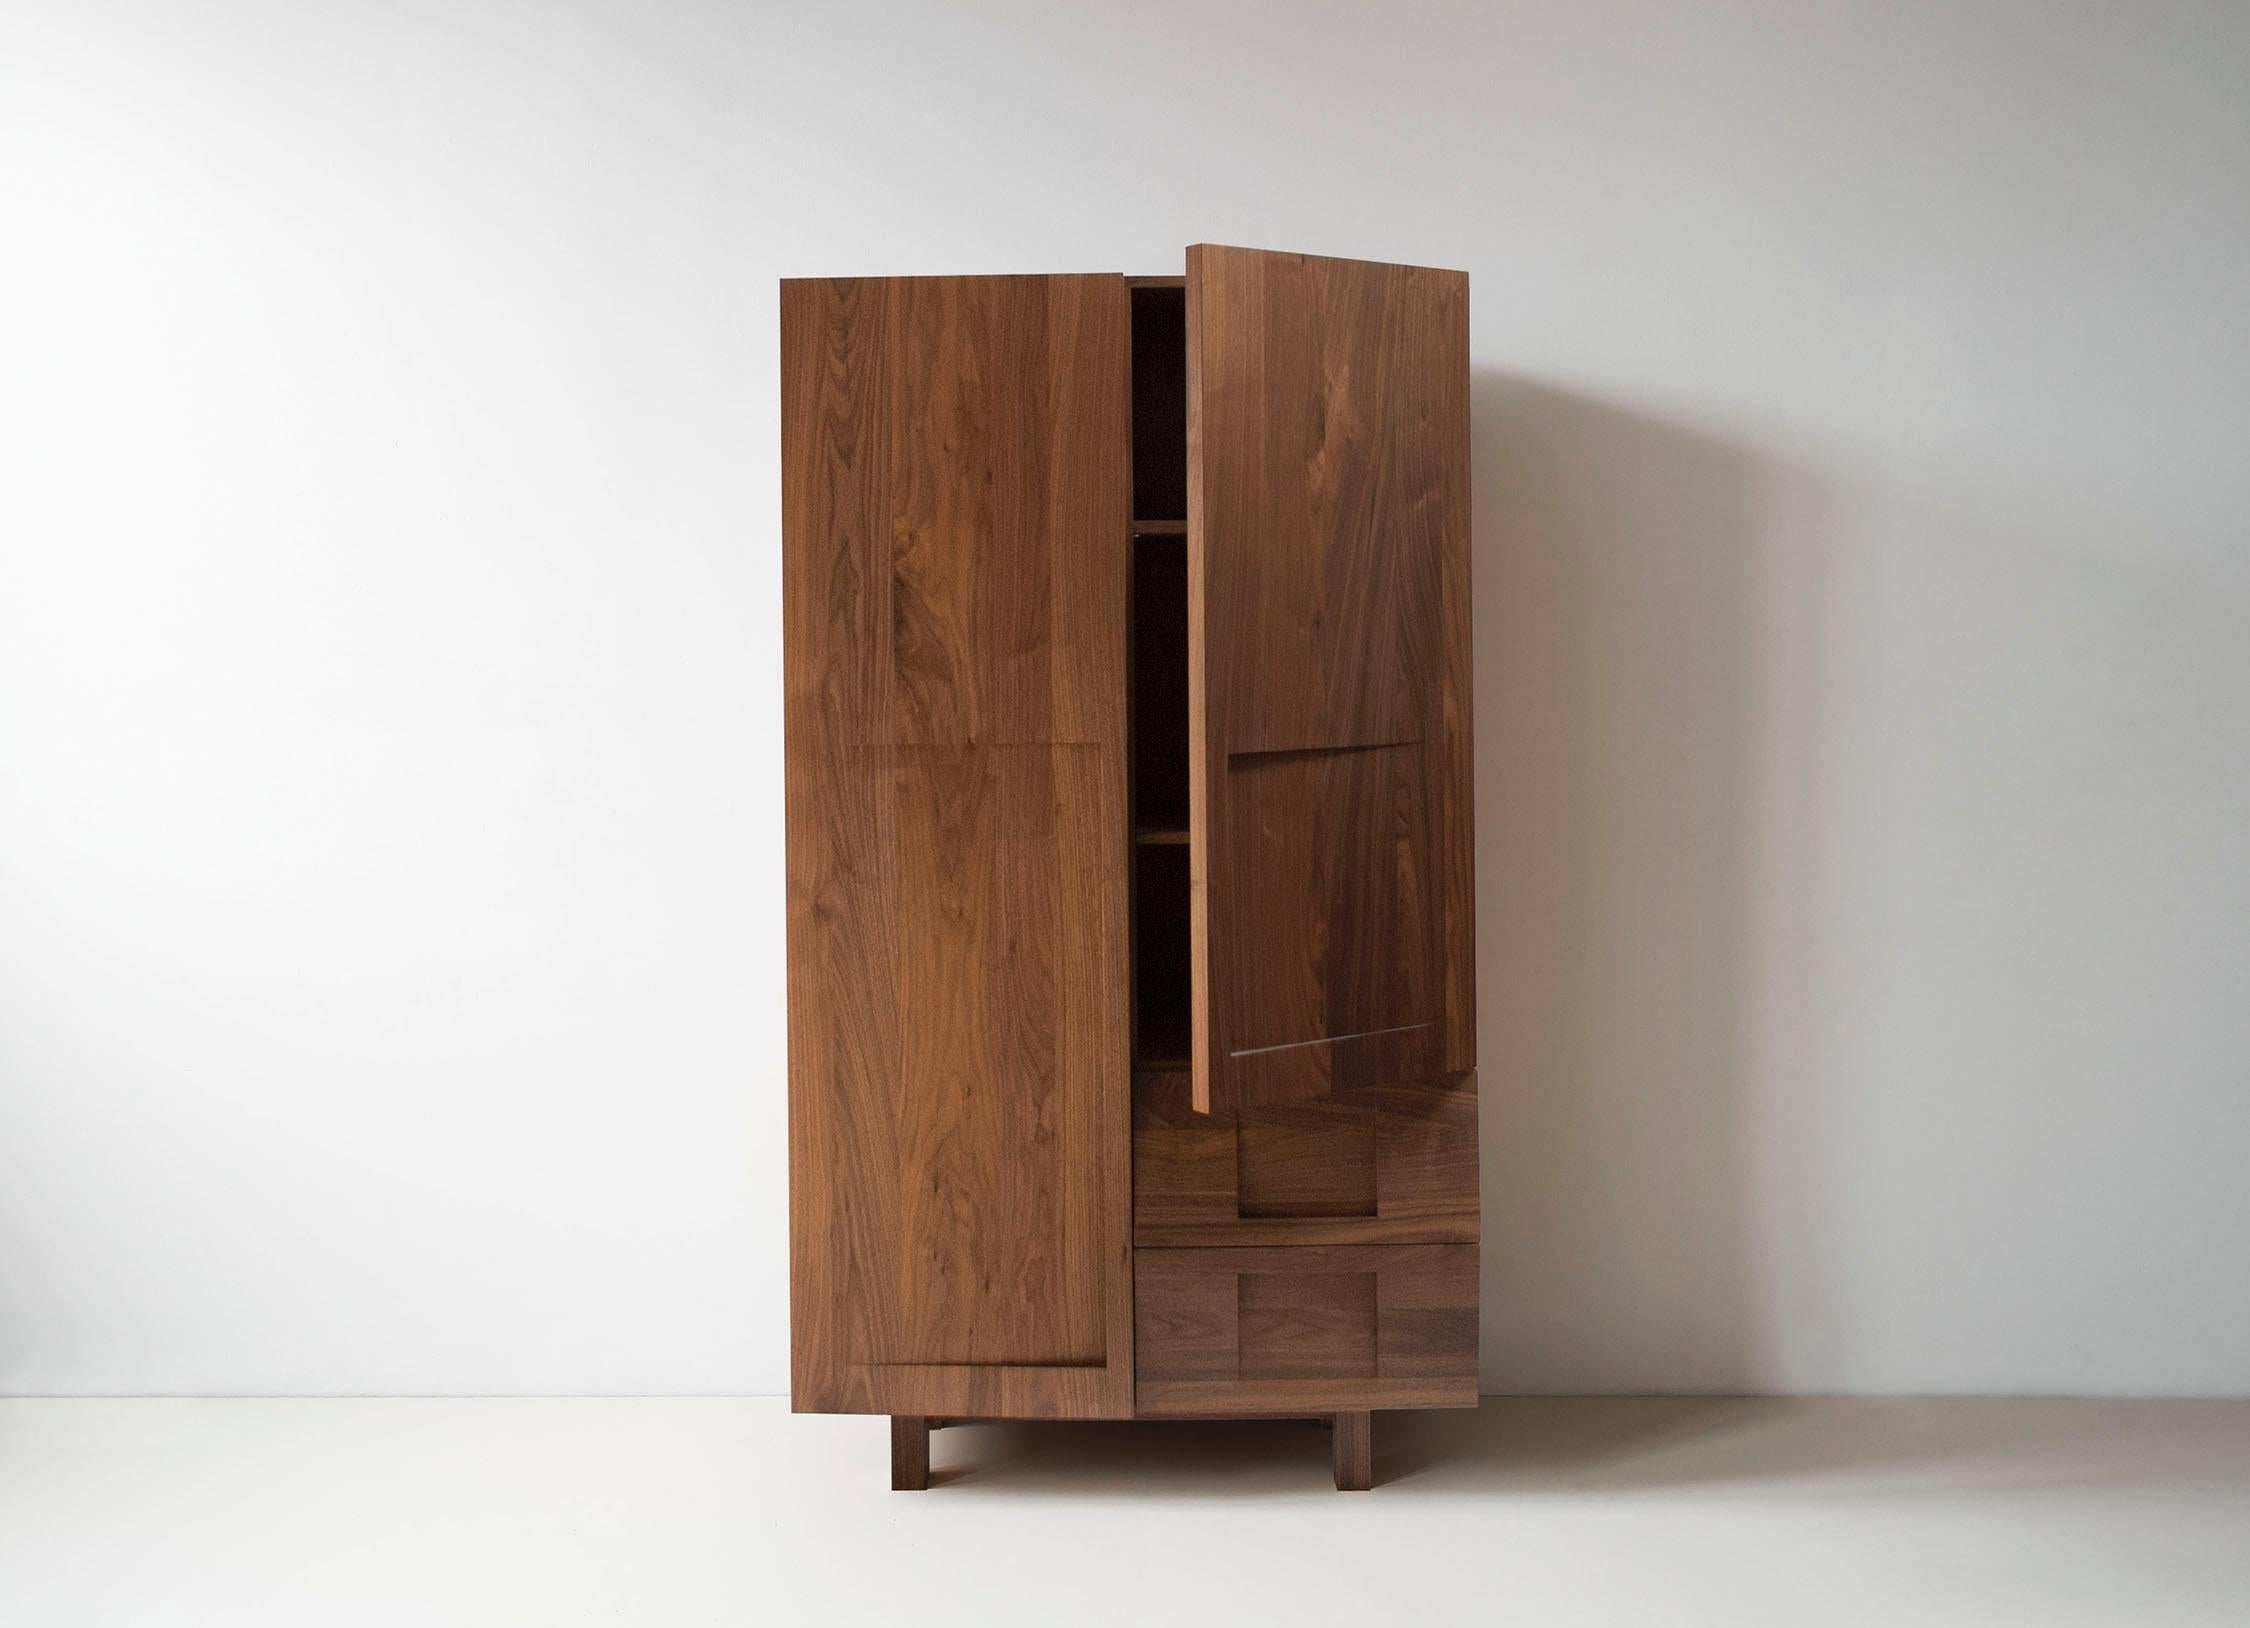 The wardrobe is one part closet, one part dresser and one part
cabinet. Featuring doors carved from solid beech, it can be
configured in numerous ways and includes a clothing rod, adjustable
shelves and drawers.